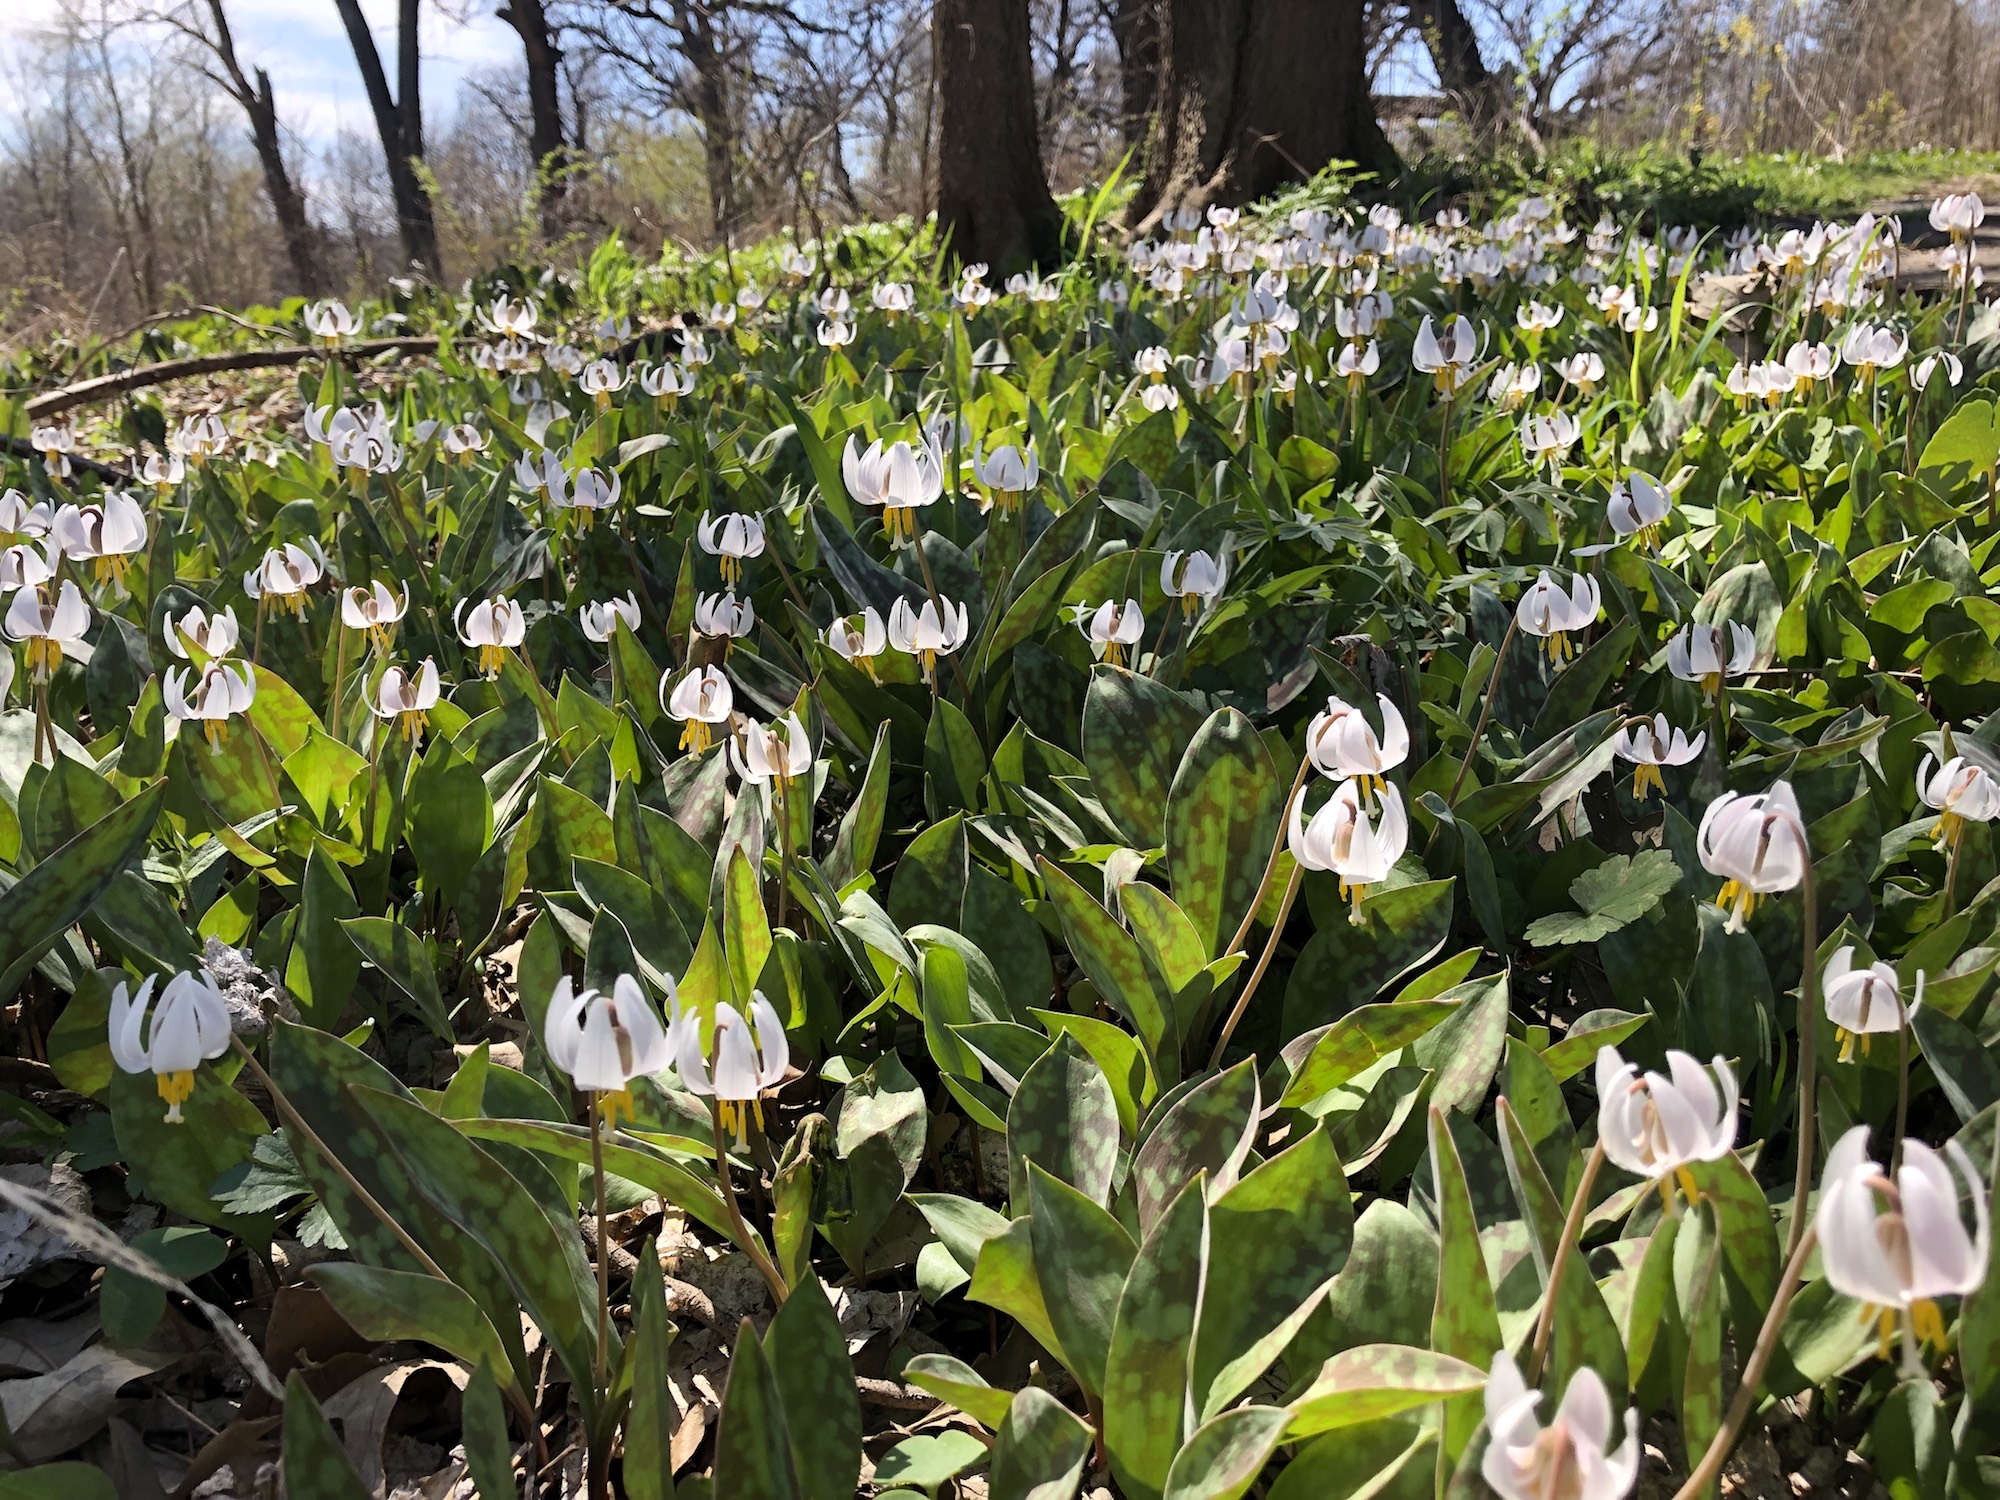 White Trout Lilies on April 24, 2019 near Council Ring.